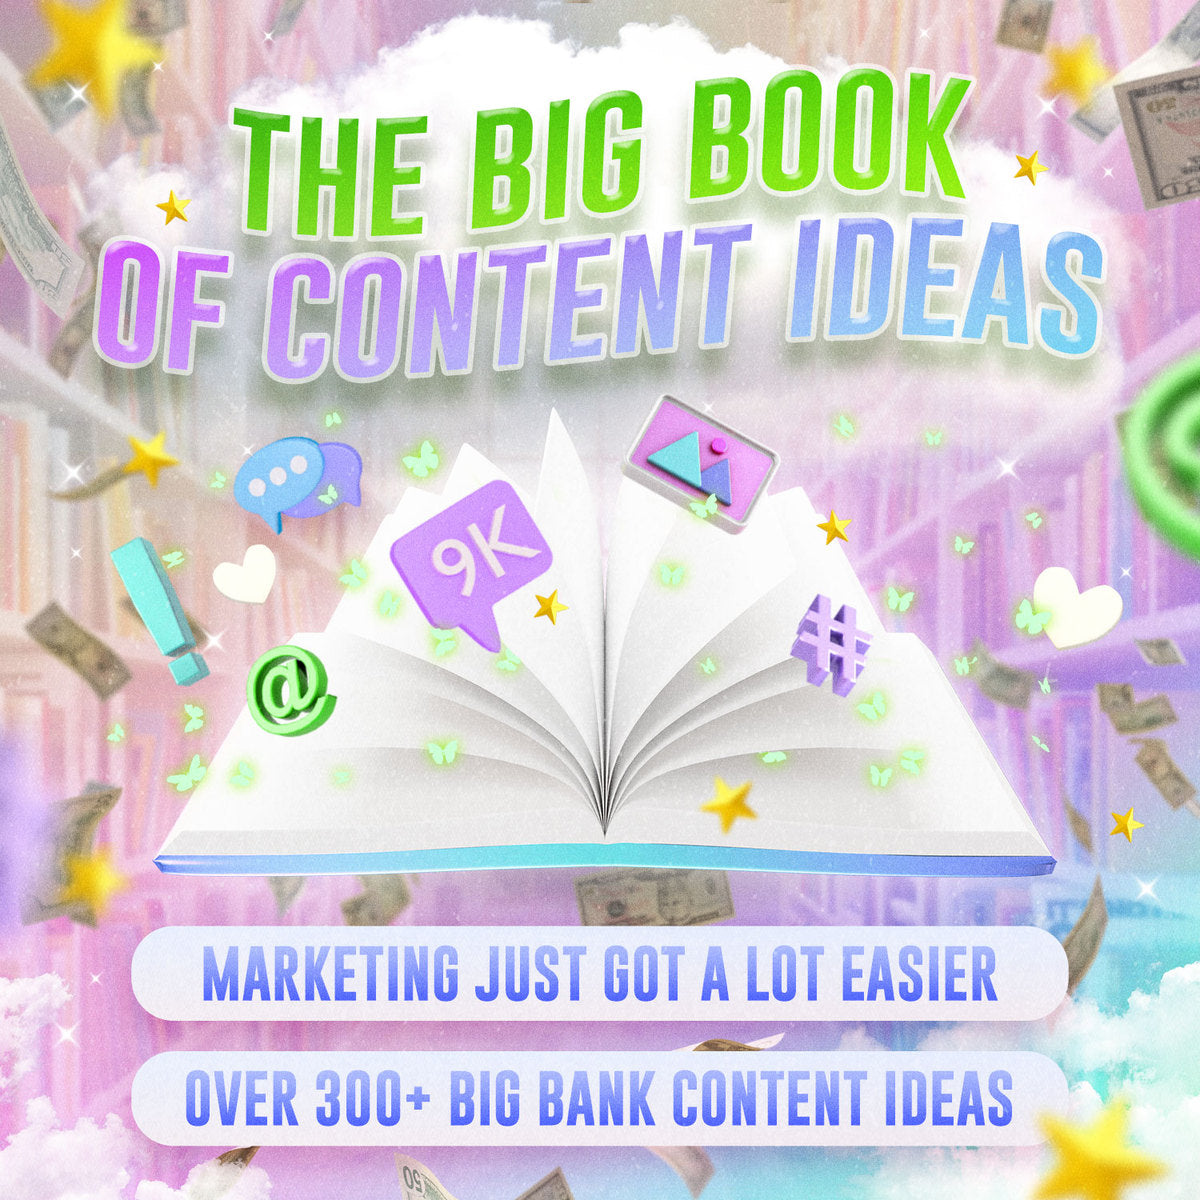 The Big Book of Content Ideas